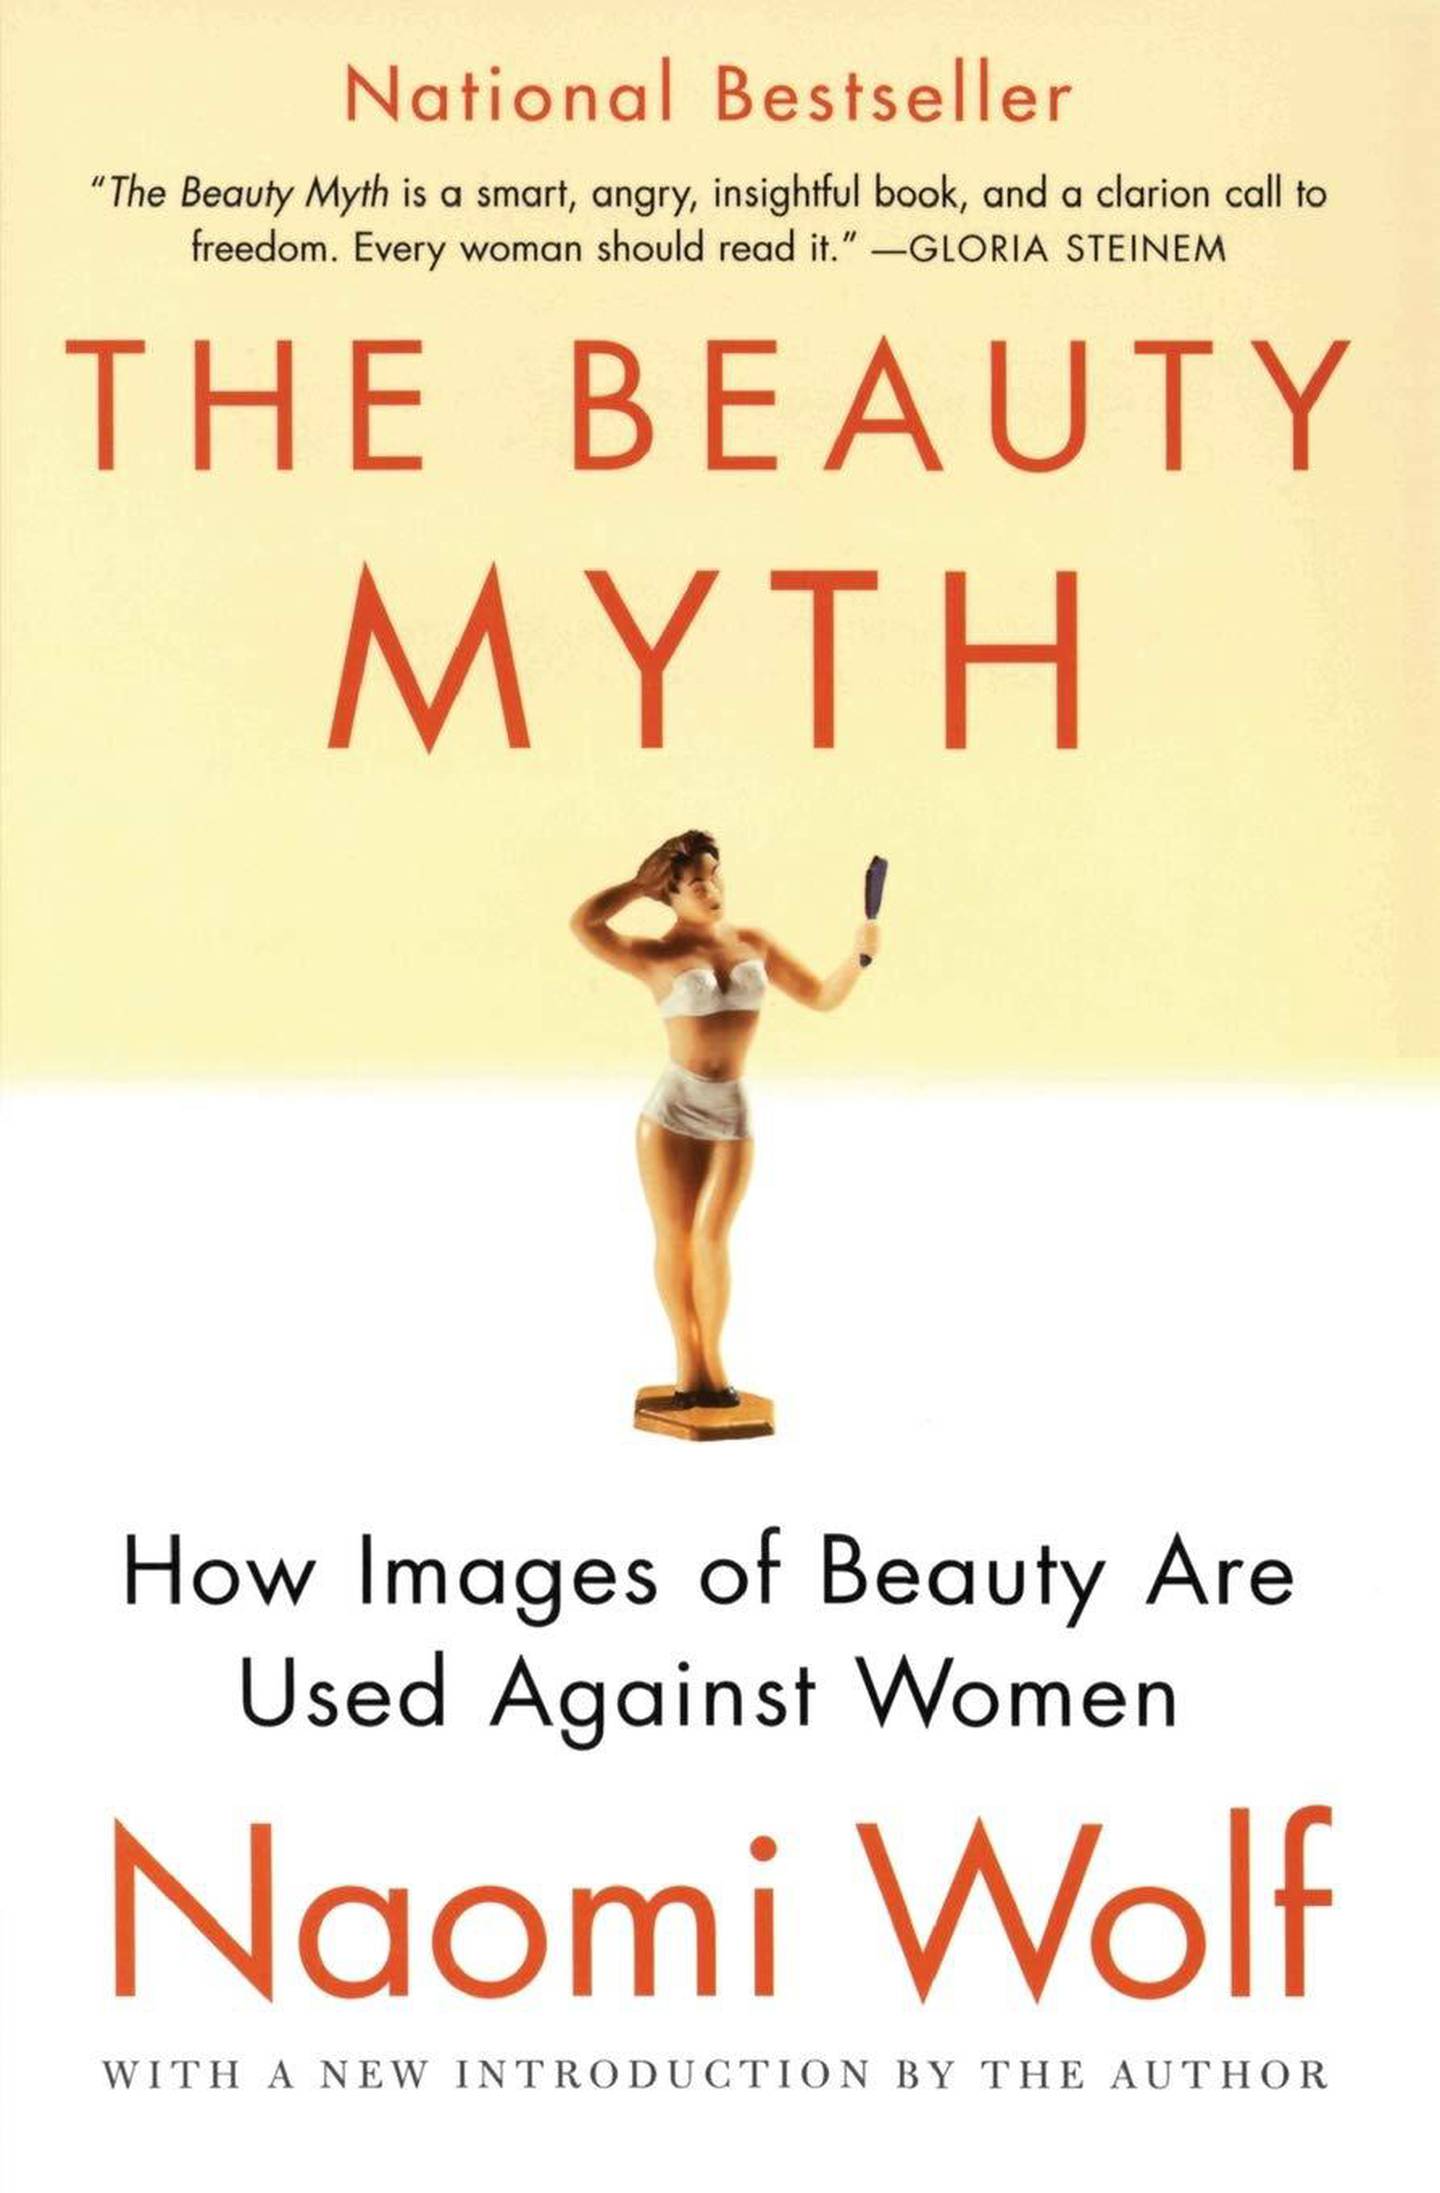 The Beauty Myth by Naomi Wolf. Courtesy Harper Collins